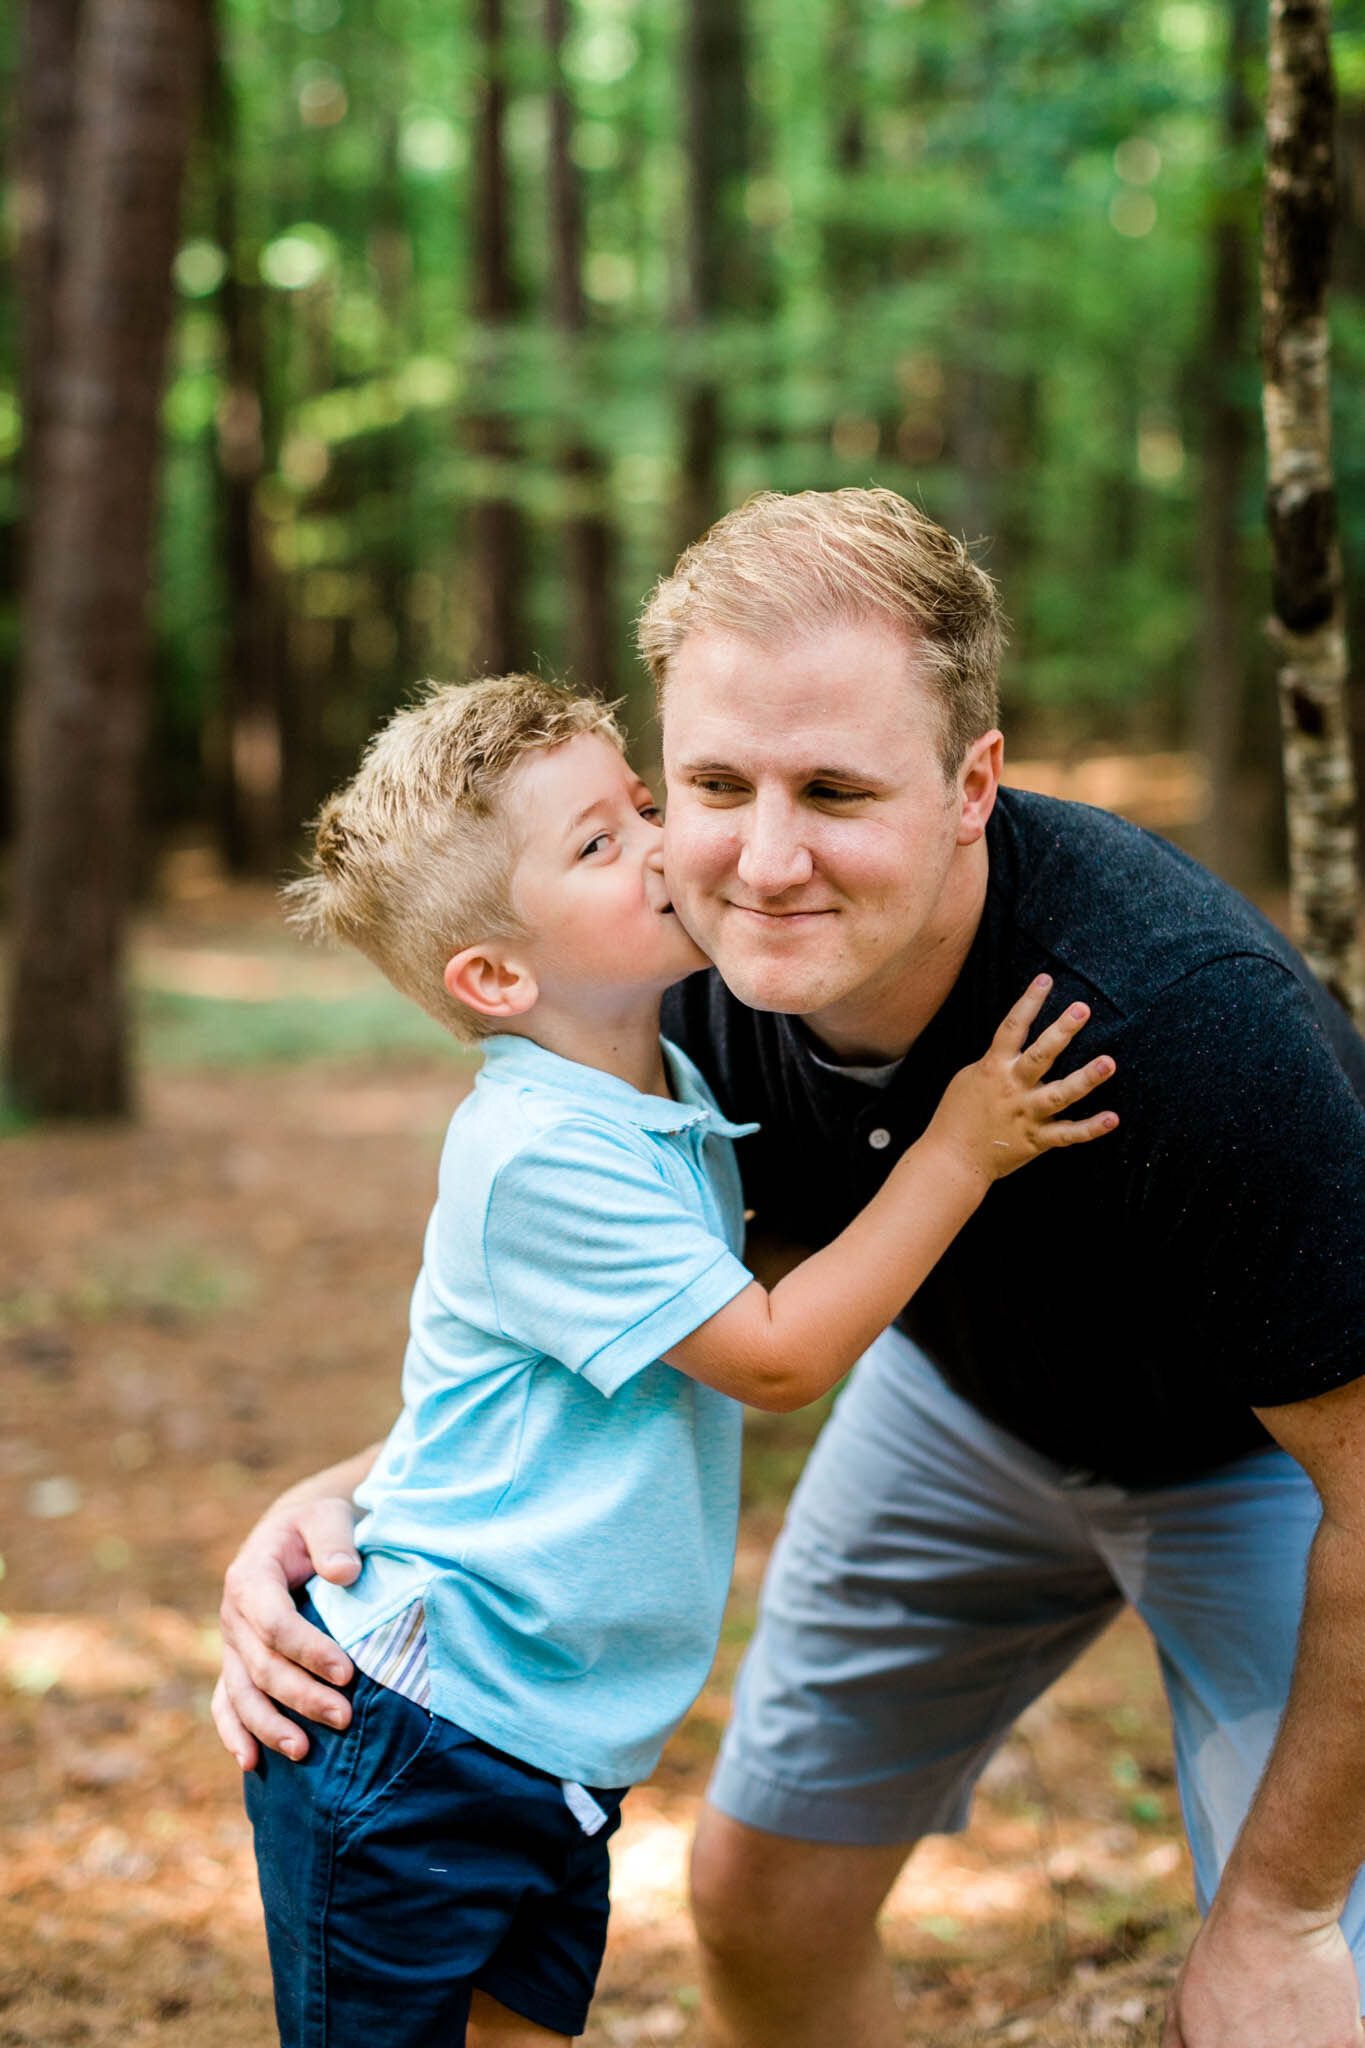 Raleigh Family Photographer | Umstead Park | By G. Lin Photography | Son kissing dad on cheek